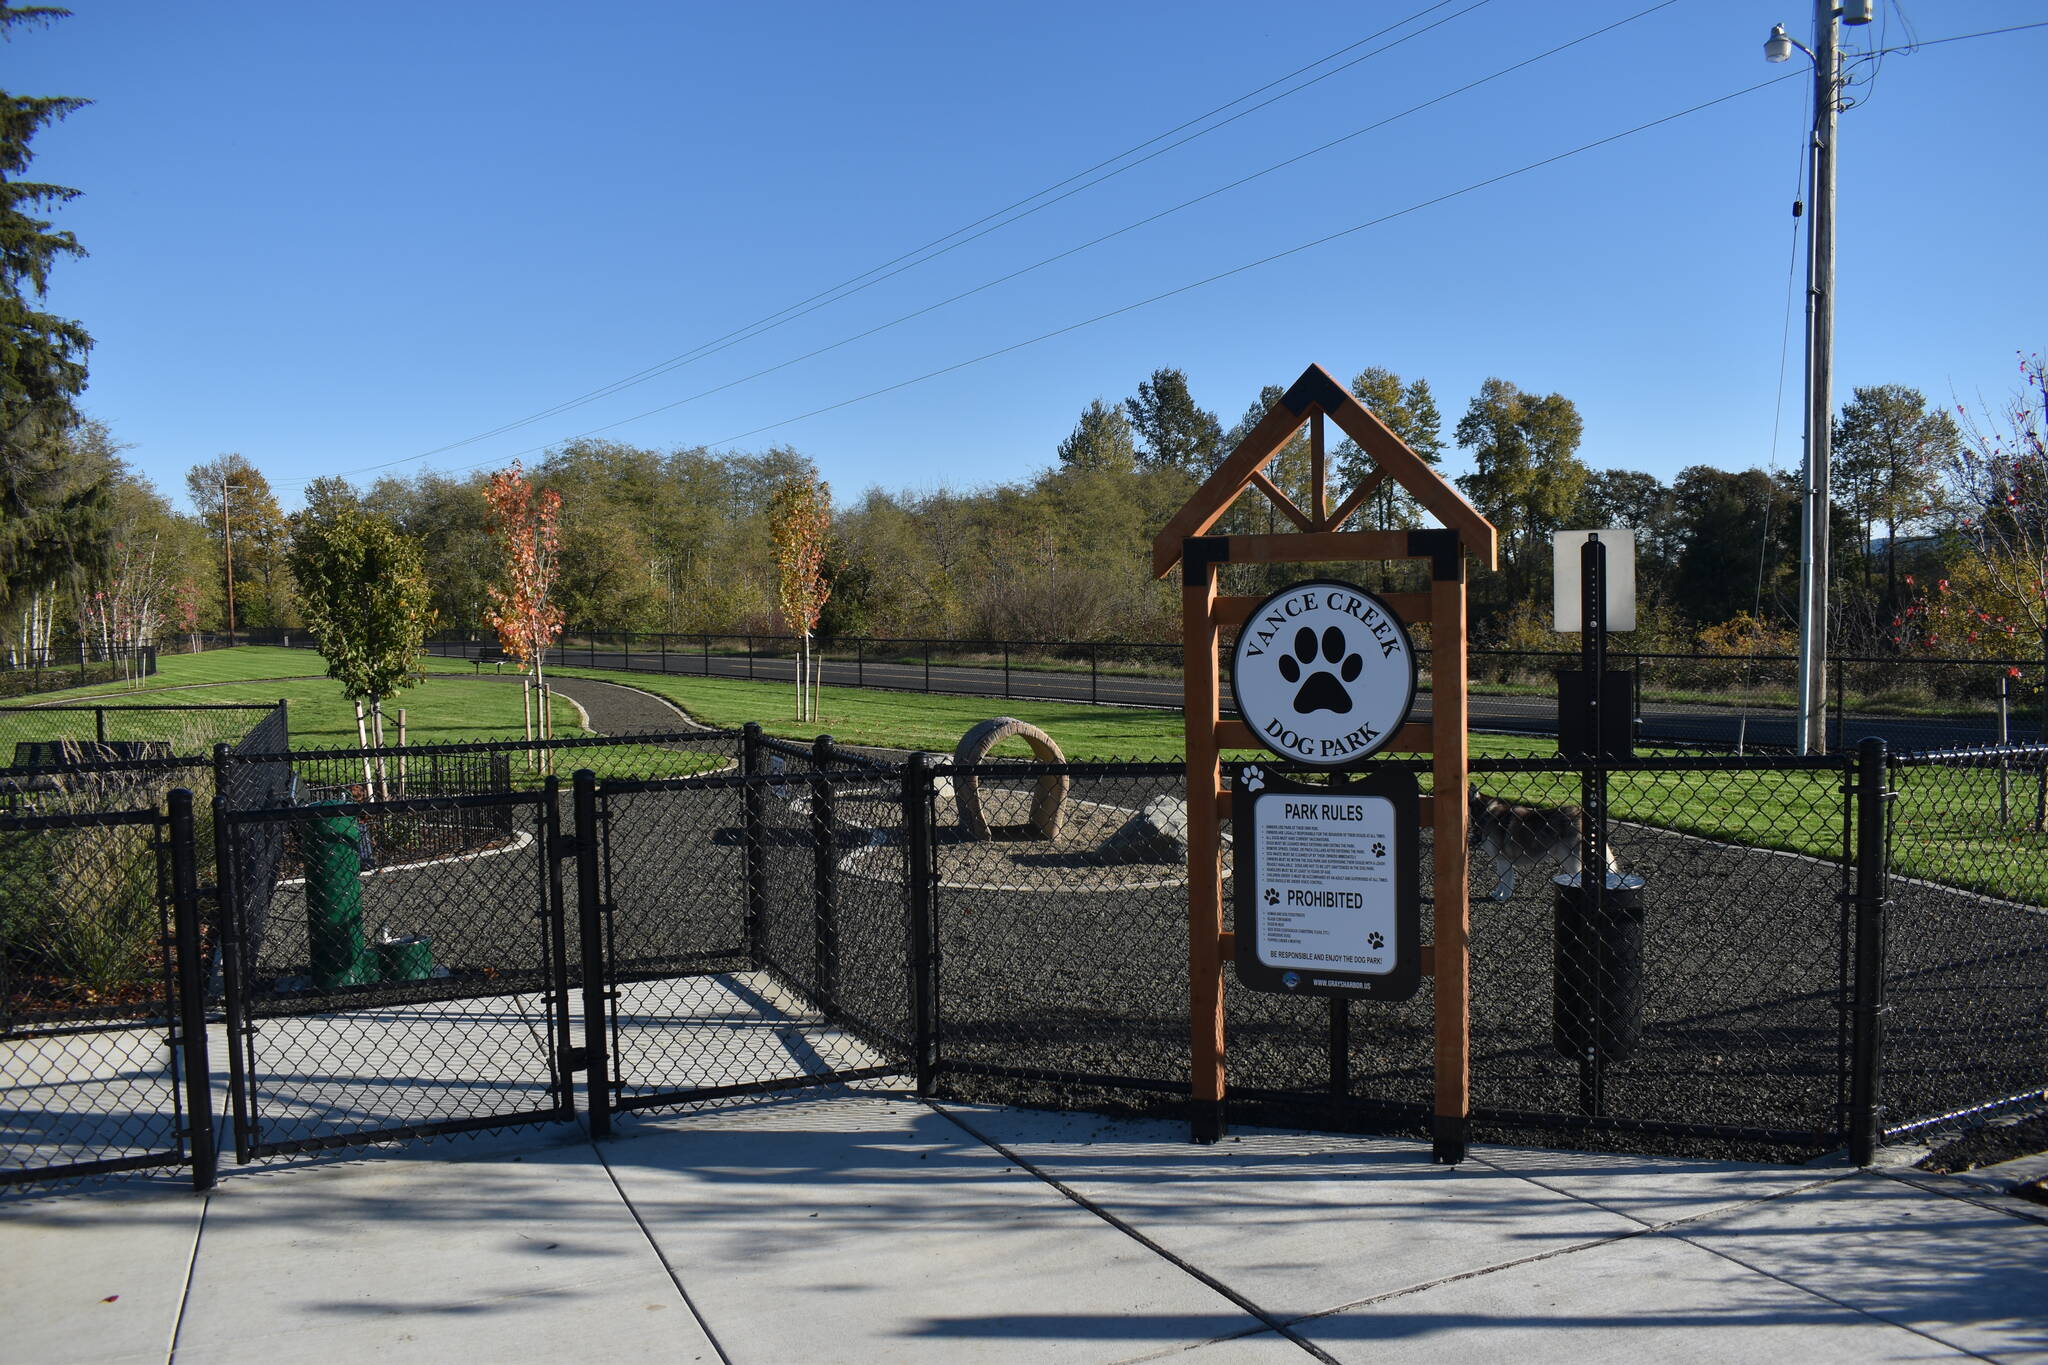 Clayton Franke / The Daily World
Vance Creek Dog Park fills nearly a half-acre near the main parking lot at Vance Creek County Park near Elma. The park officially opened on Oct. 27.